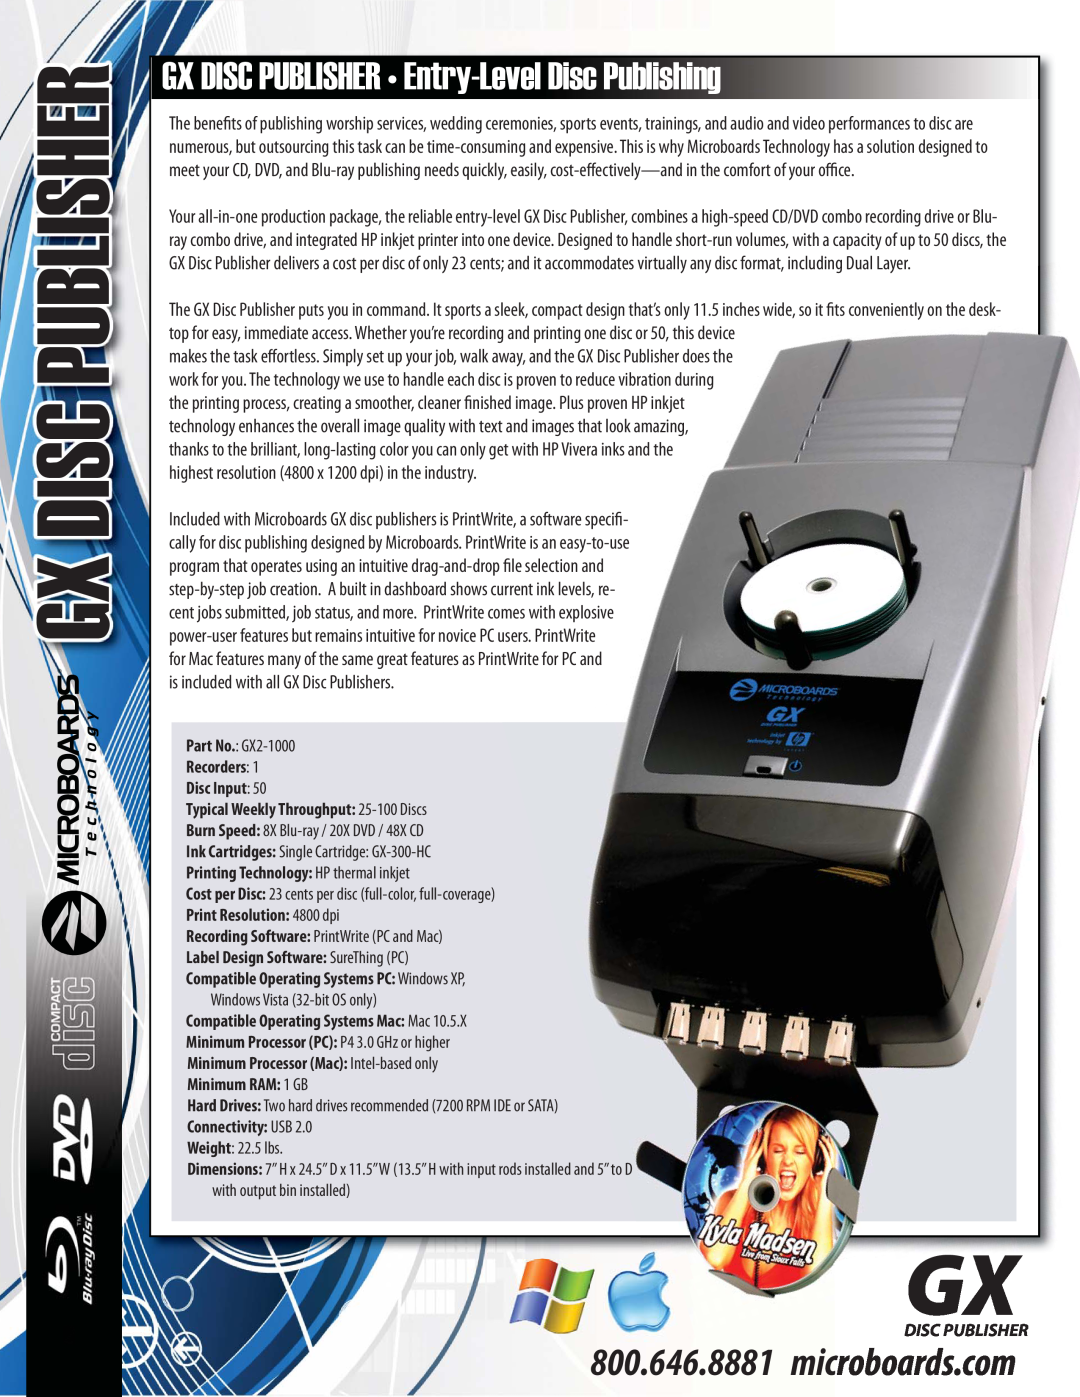 MicroBoards Technology GX2-1000 dimensions ¸ Gx Disc Publisher, Printing Technology HP thermal inkjet, Connectivity USB 